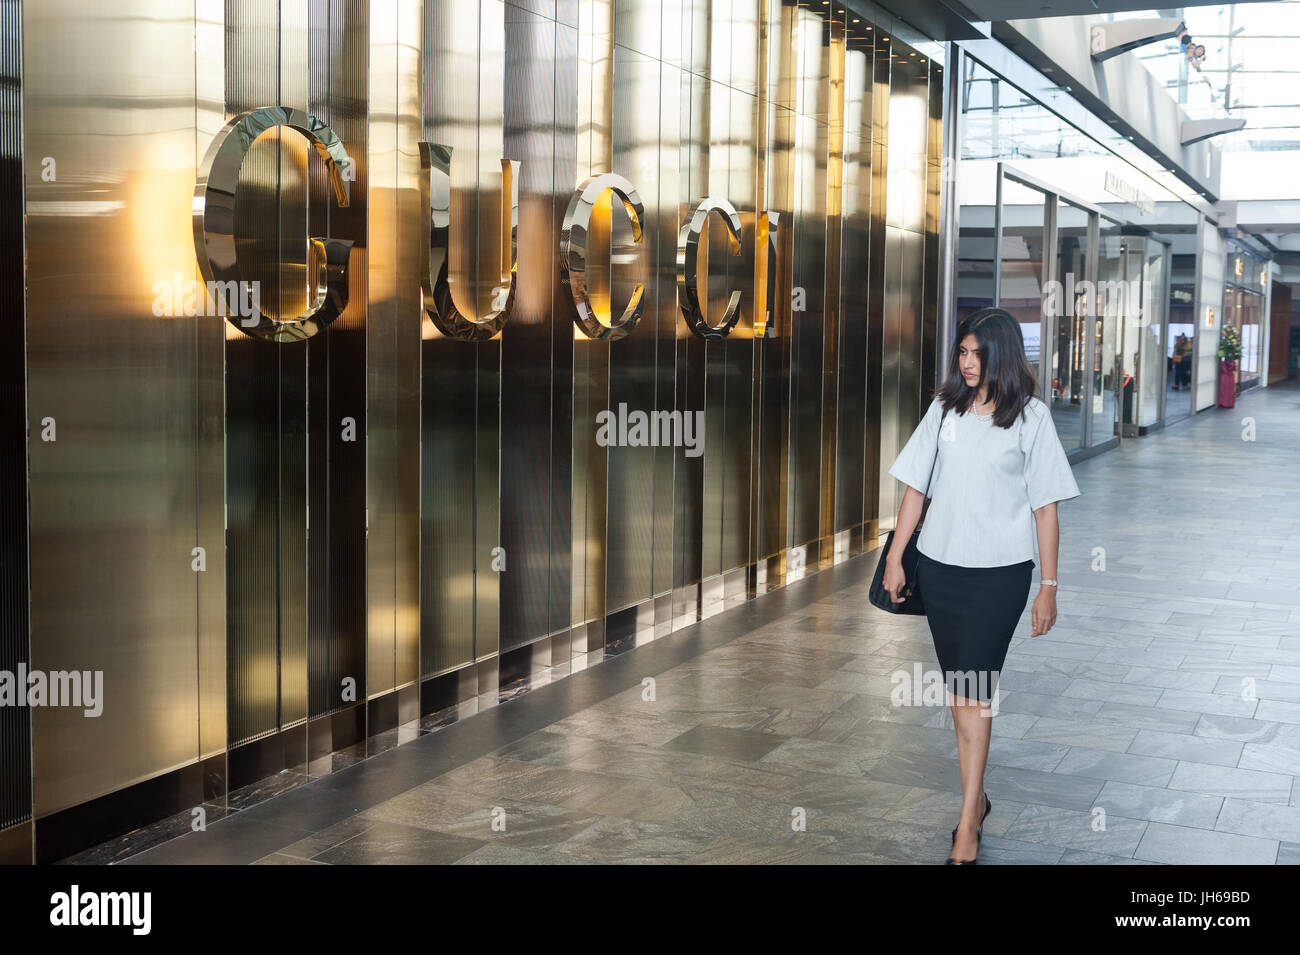 25.05.2017, Singapore, Republic of Singapore, Asia - A woman walks by a retail shop of the luxury brand Gucci in 'The Shoppes' shopping mall. Stock Photo